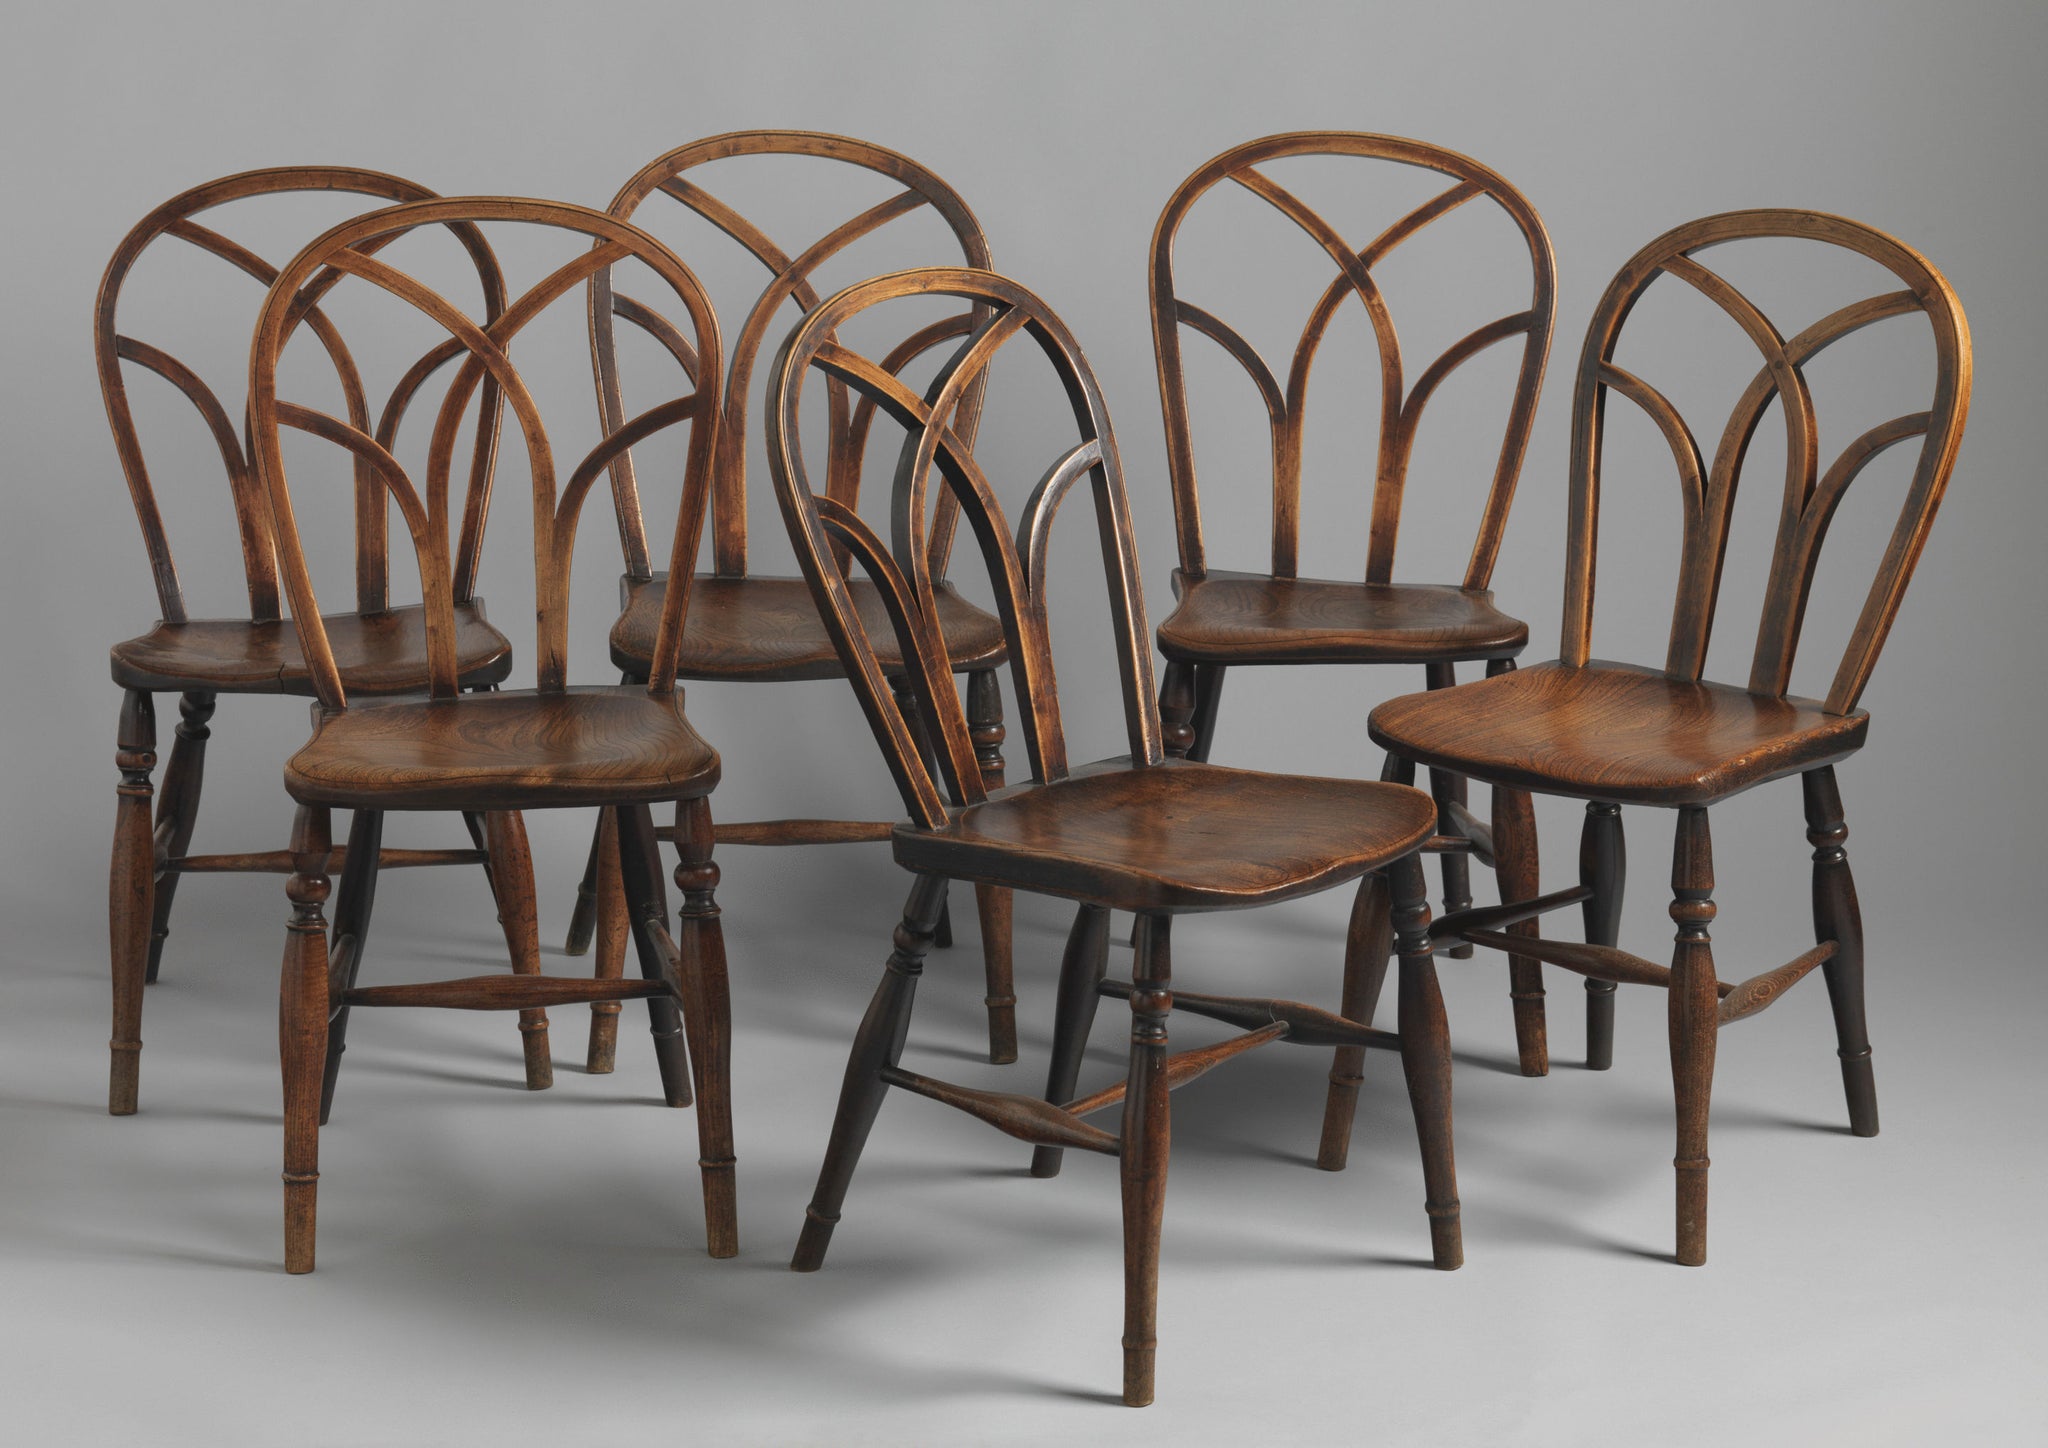 Harlequin Set of Six Gothic Lace Back Windsor Chairs